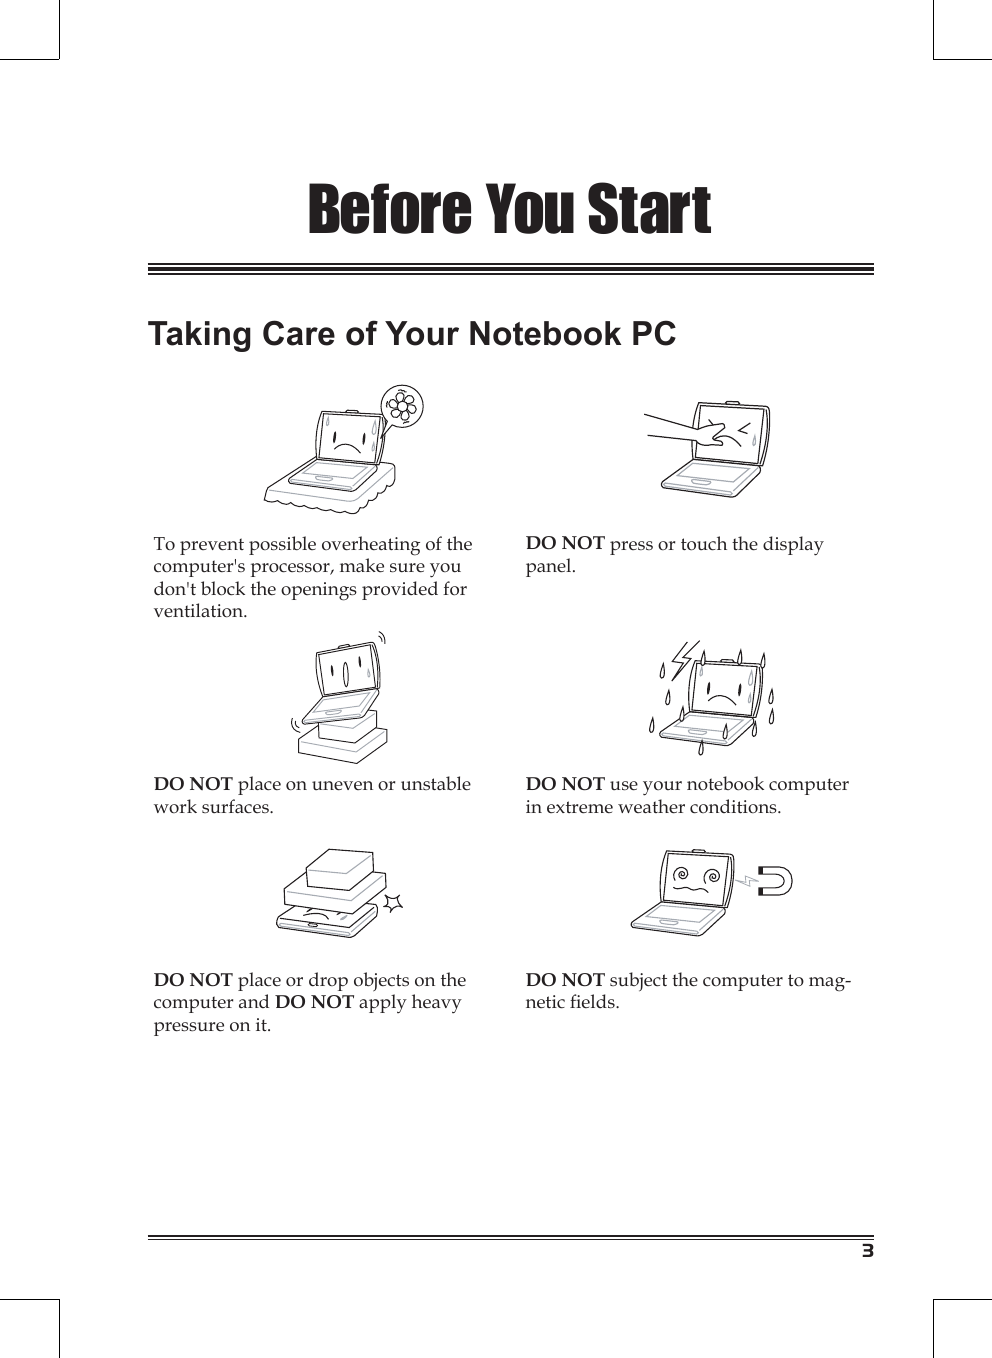 3Before You StartTaking Care of Your Notebook PCTo prevent possible overheating of the computer&apos;s processor, make sure you don&apos;t block the openings provided for ventilation.DO NOT press or touch the display panel.DO NOT place on uneven or unstable work surfaces.DO NOT use your notebook computer in extreme weather conditions.DO NOT place or drop objects on the computer and DO NOT apply heavy pressure on it.DO NOT subject the computer to mag-netic elds.